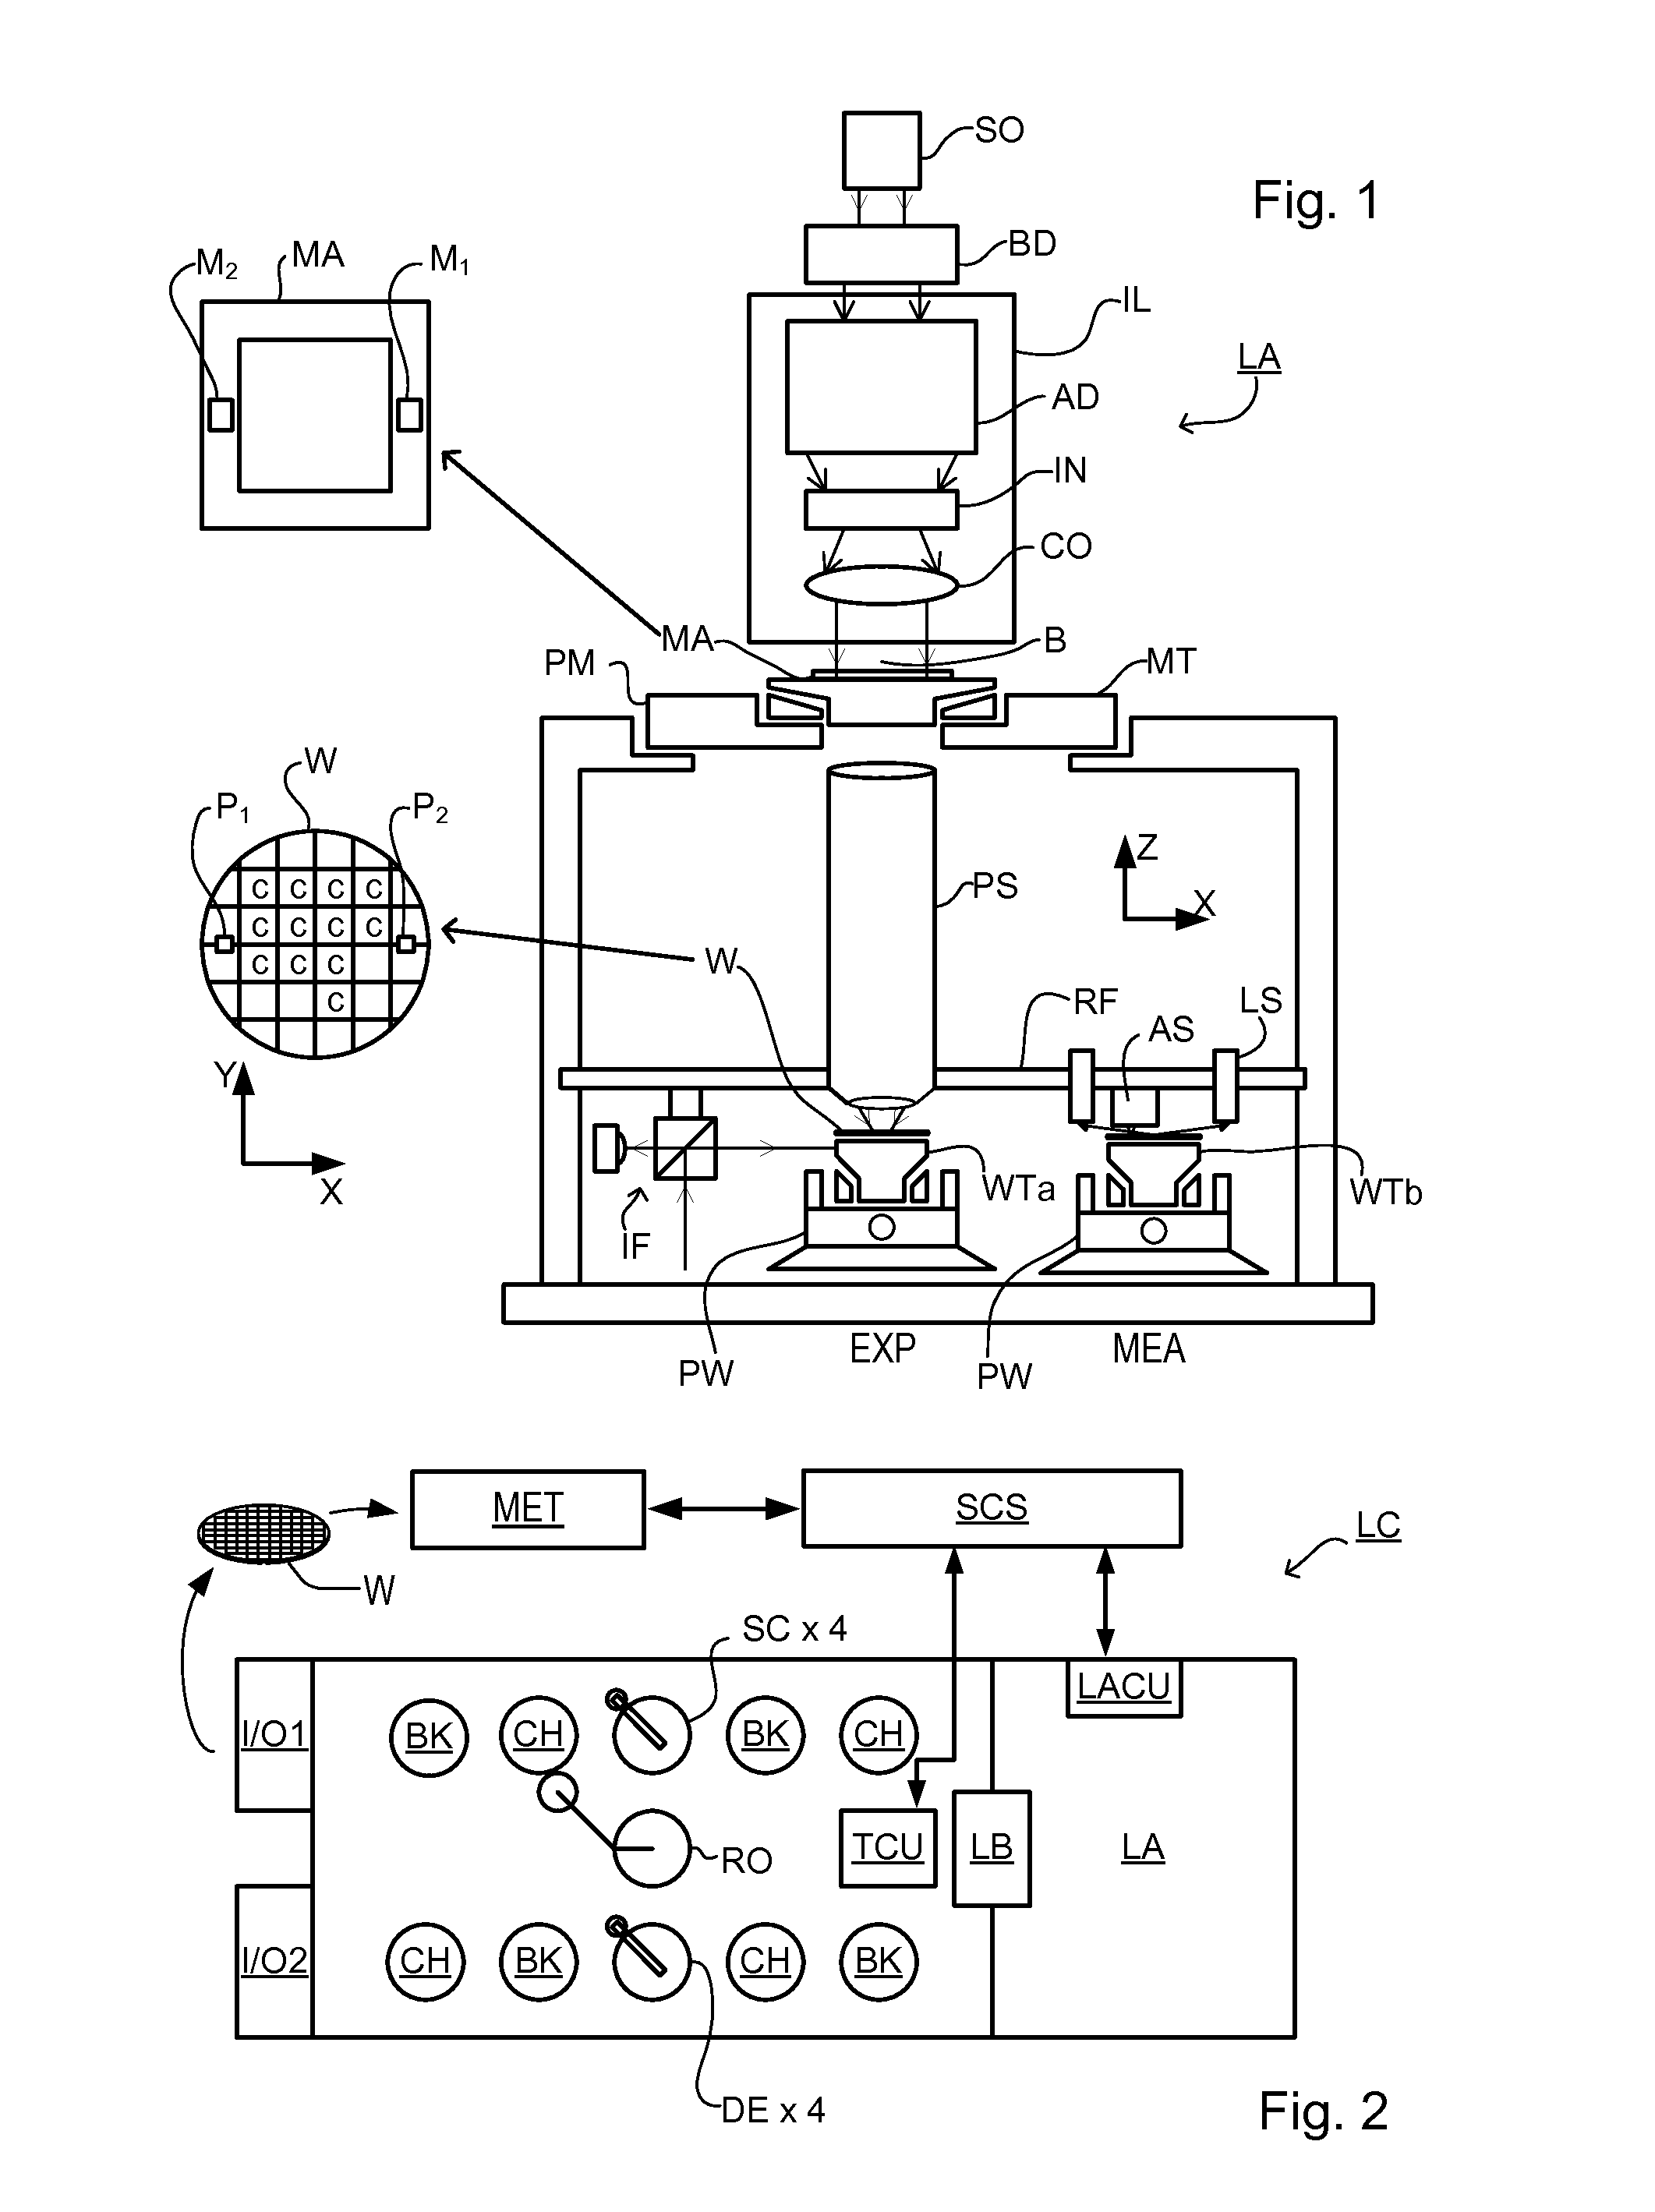 Illumination System, Inspection Apparatus Including Such an Illumination System, Inspection Method and Manufacturing Method